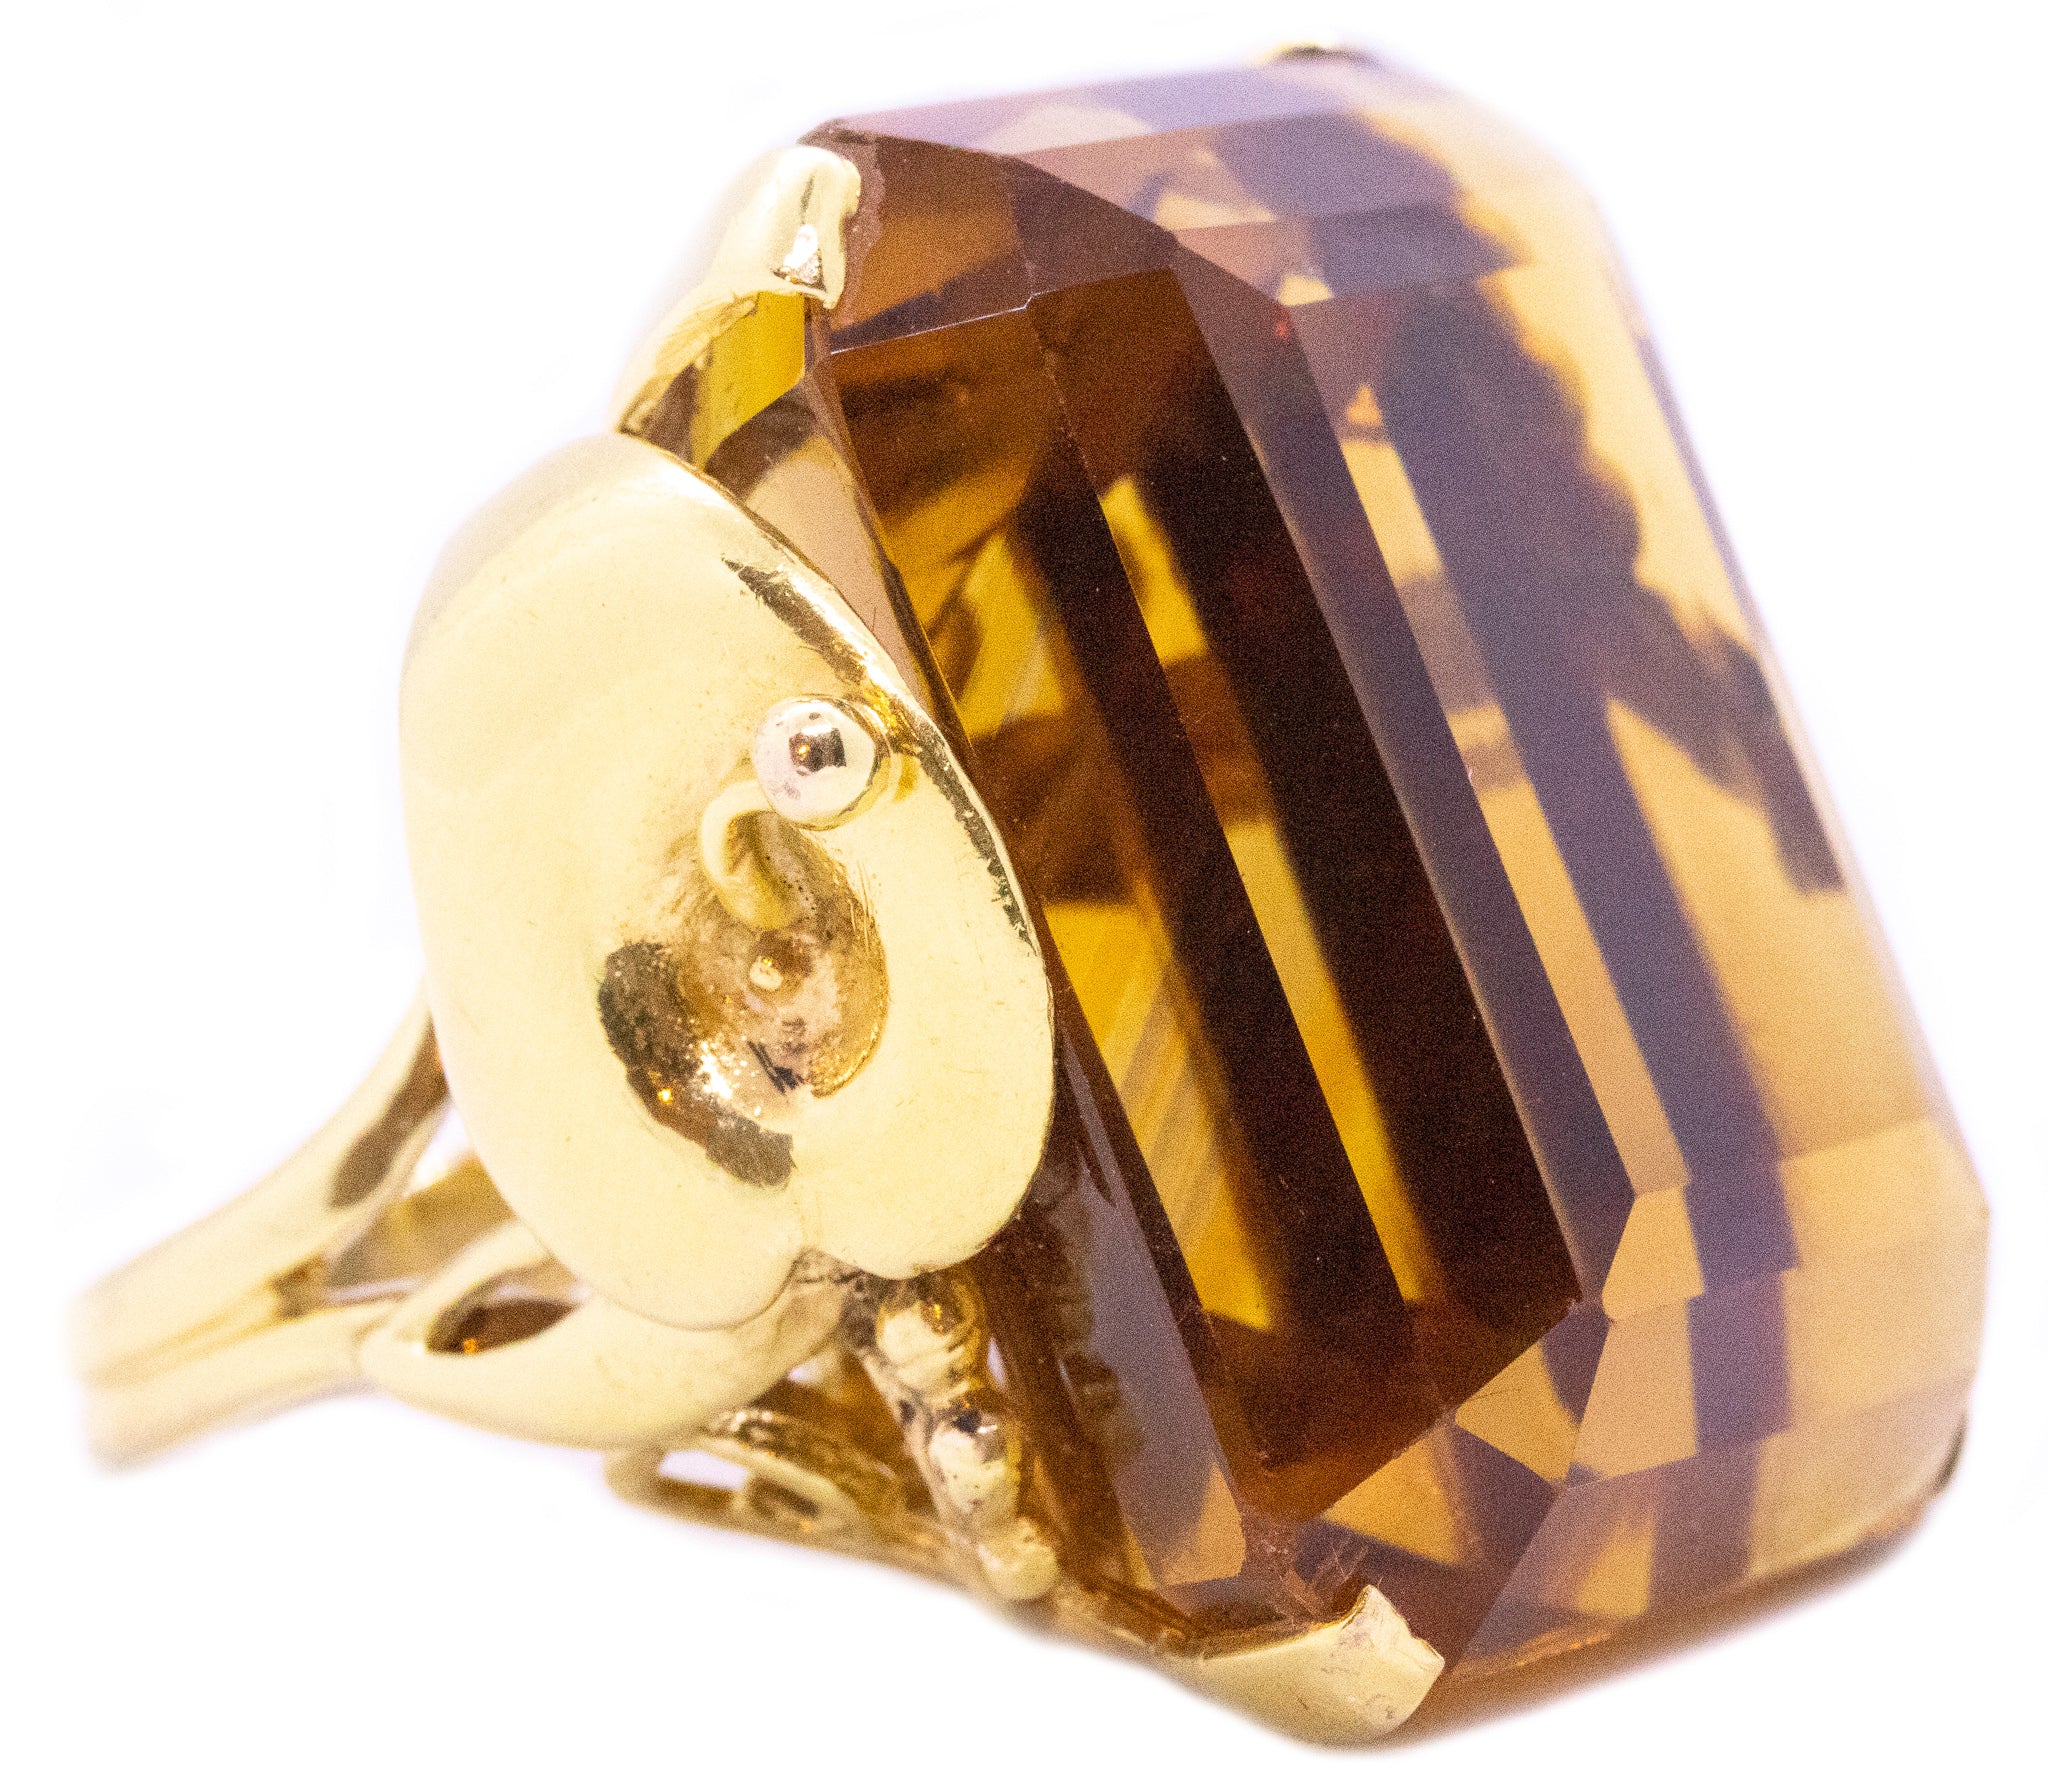 STATEMENT 18 KT MASSIVE RING WITH A 113.53 Cts MADEIRA ORANGE CITRINE